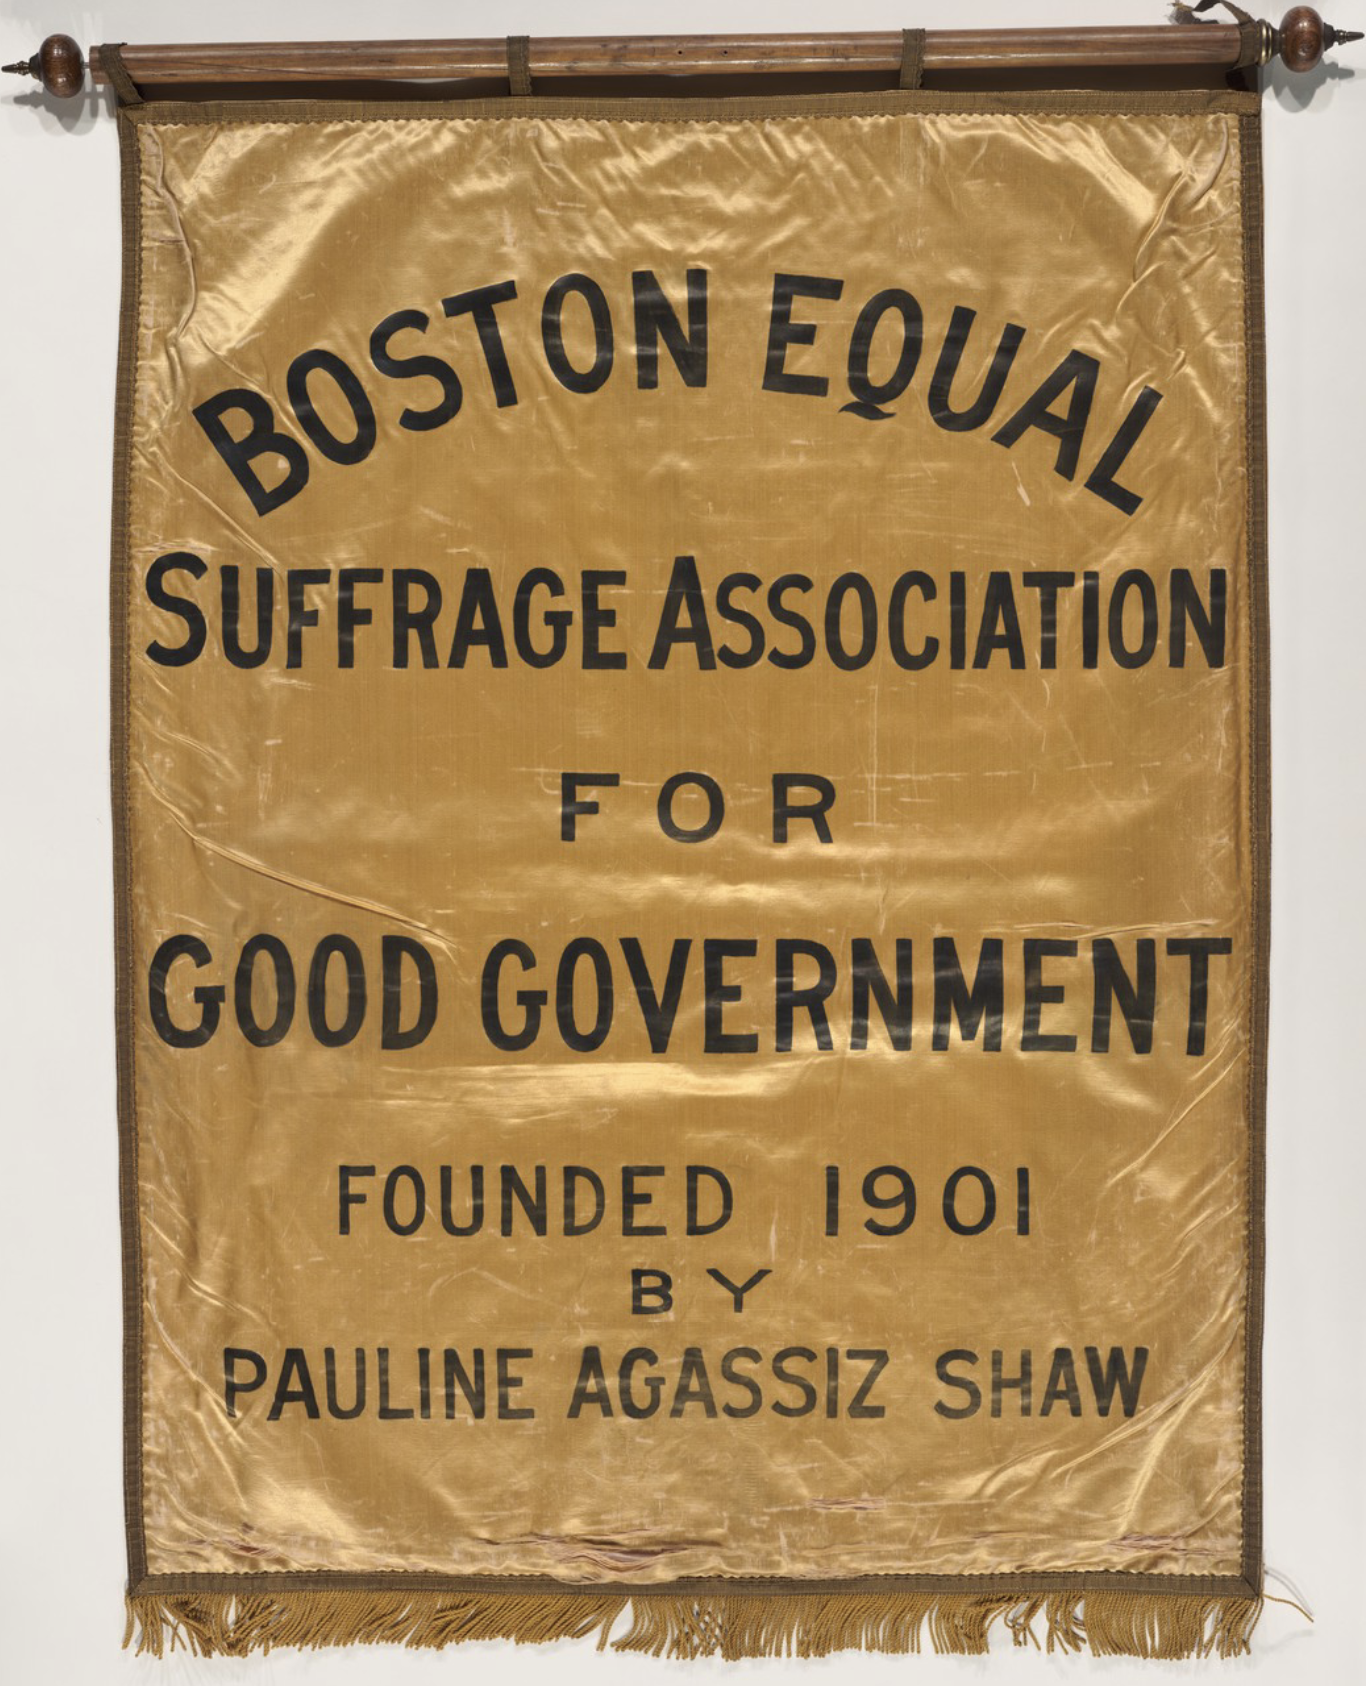 Gold Banner that reads "Boston Equal Suffrage Association for Good Government founded 1901 by Pauline Agassiz Shaw."